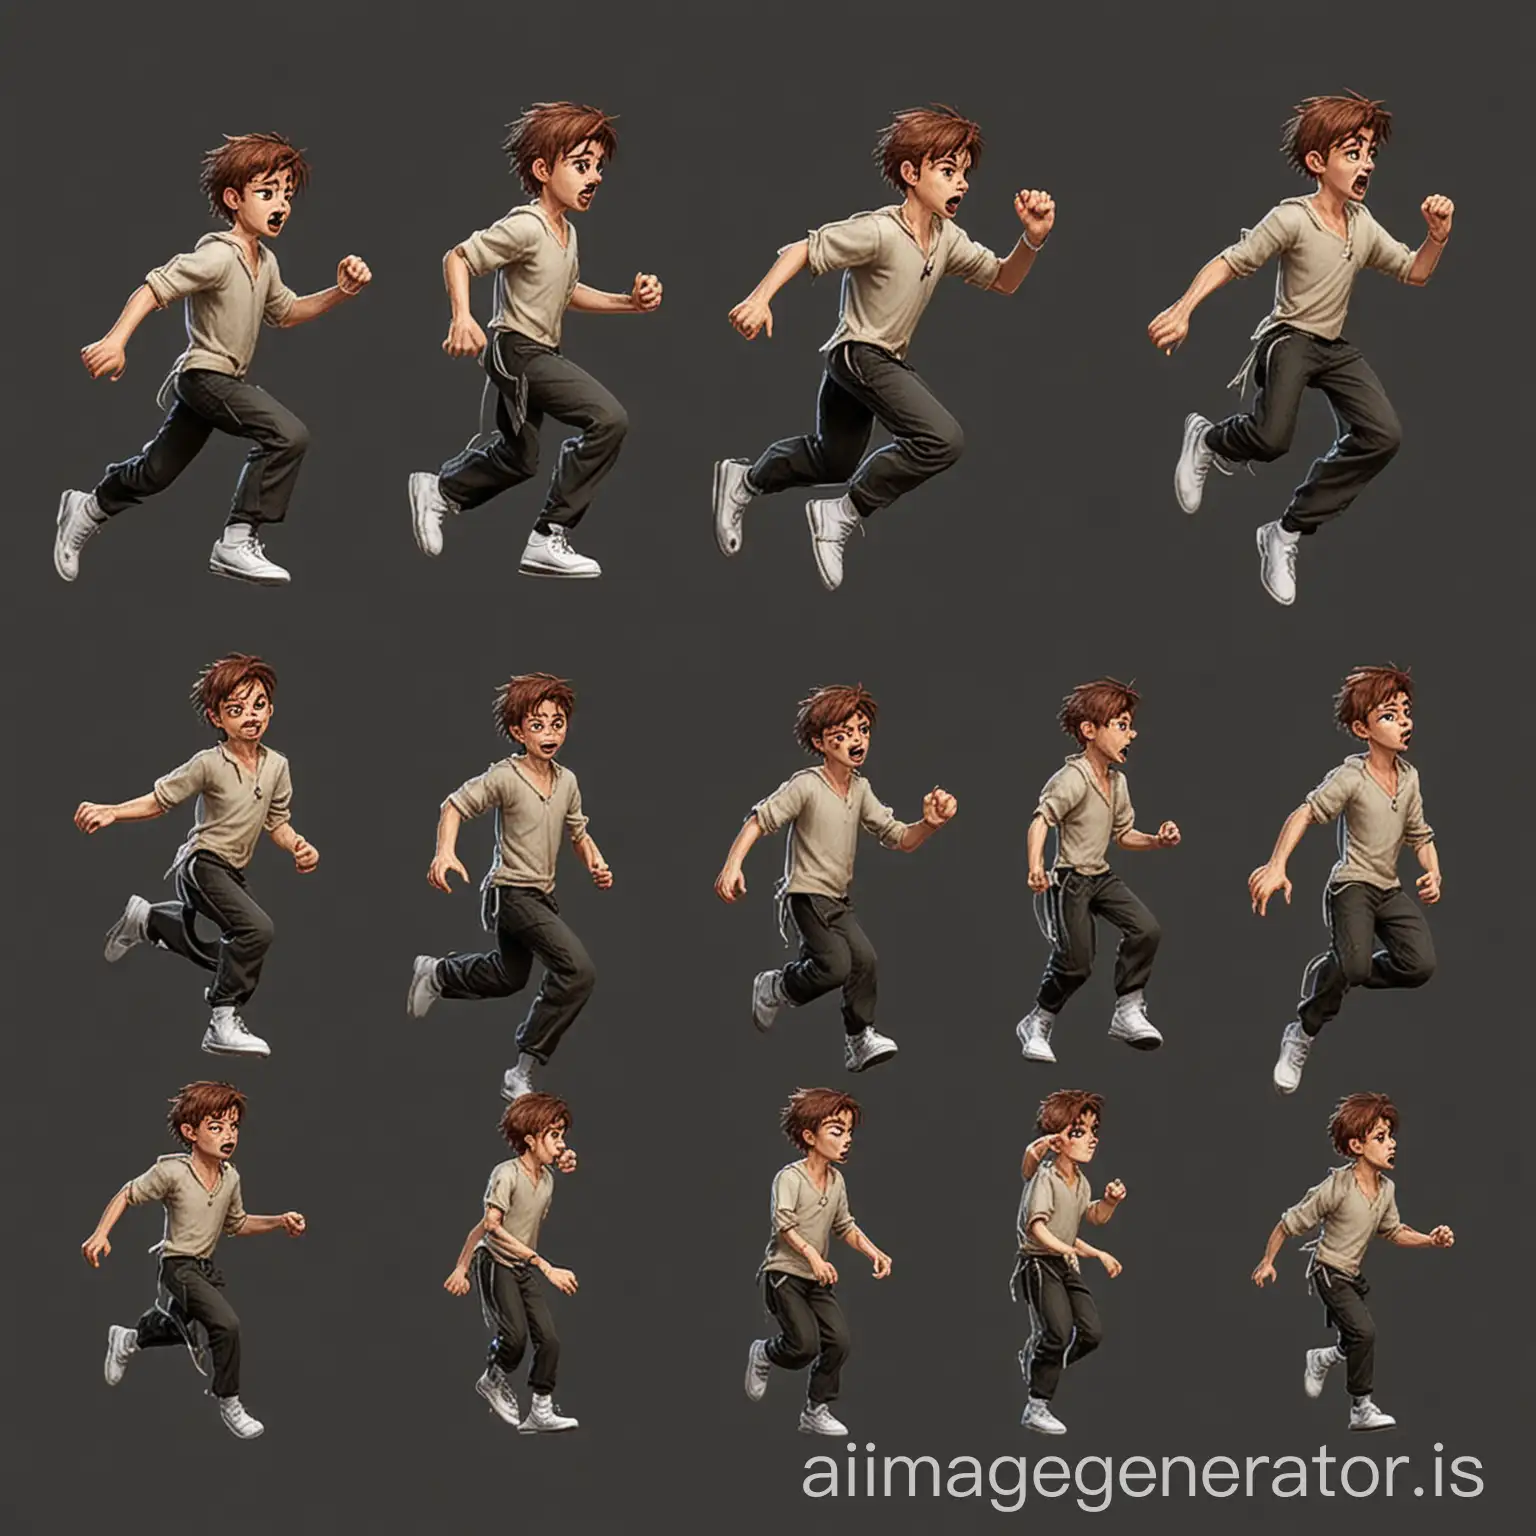 Dynamic-Boy-Sprite-Animation-Sheet-Running-Jumping-Fighting-and-More